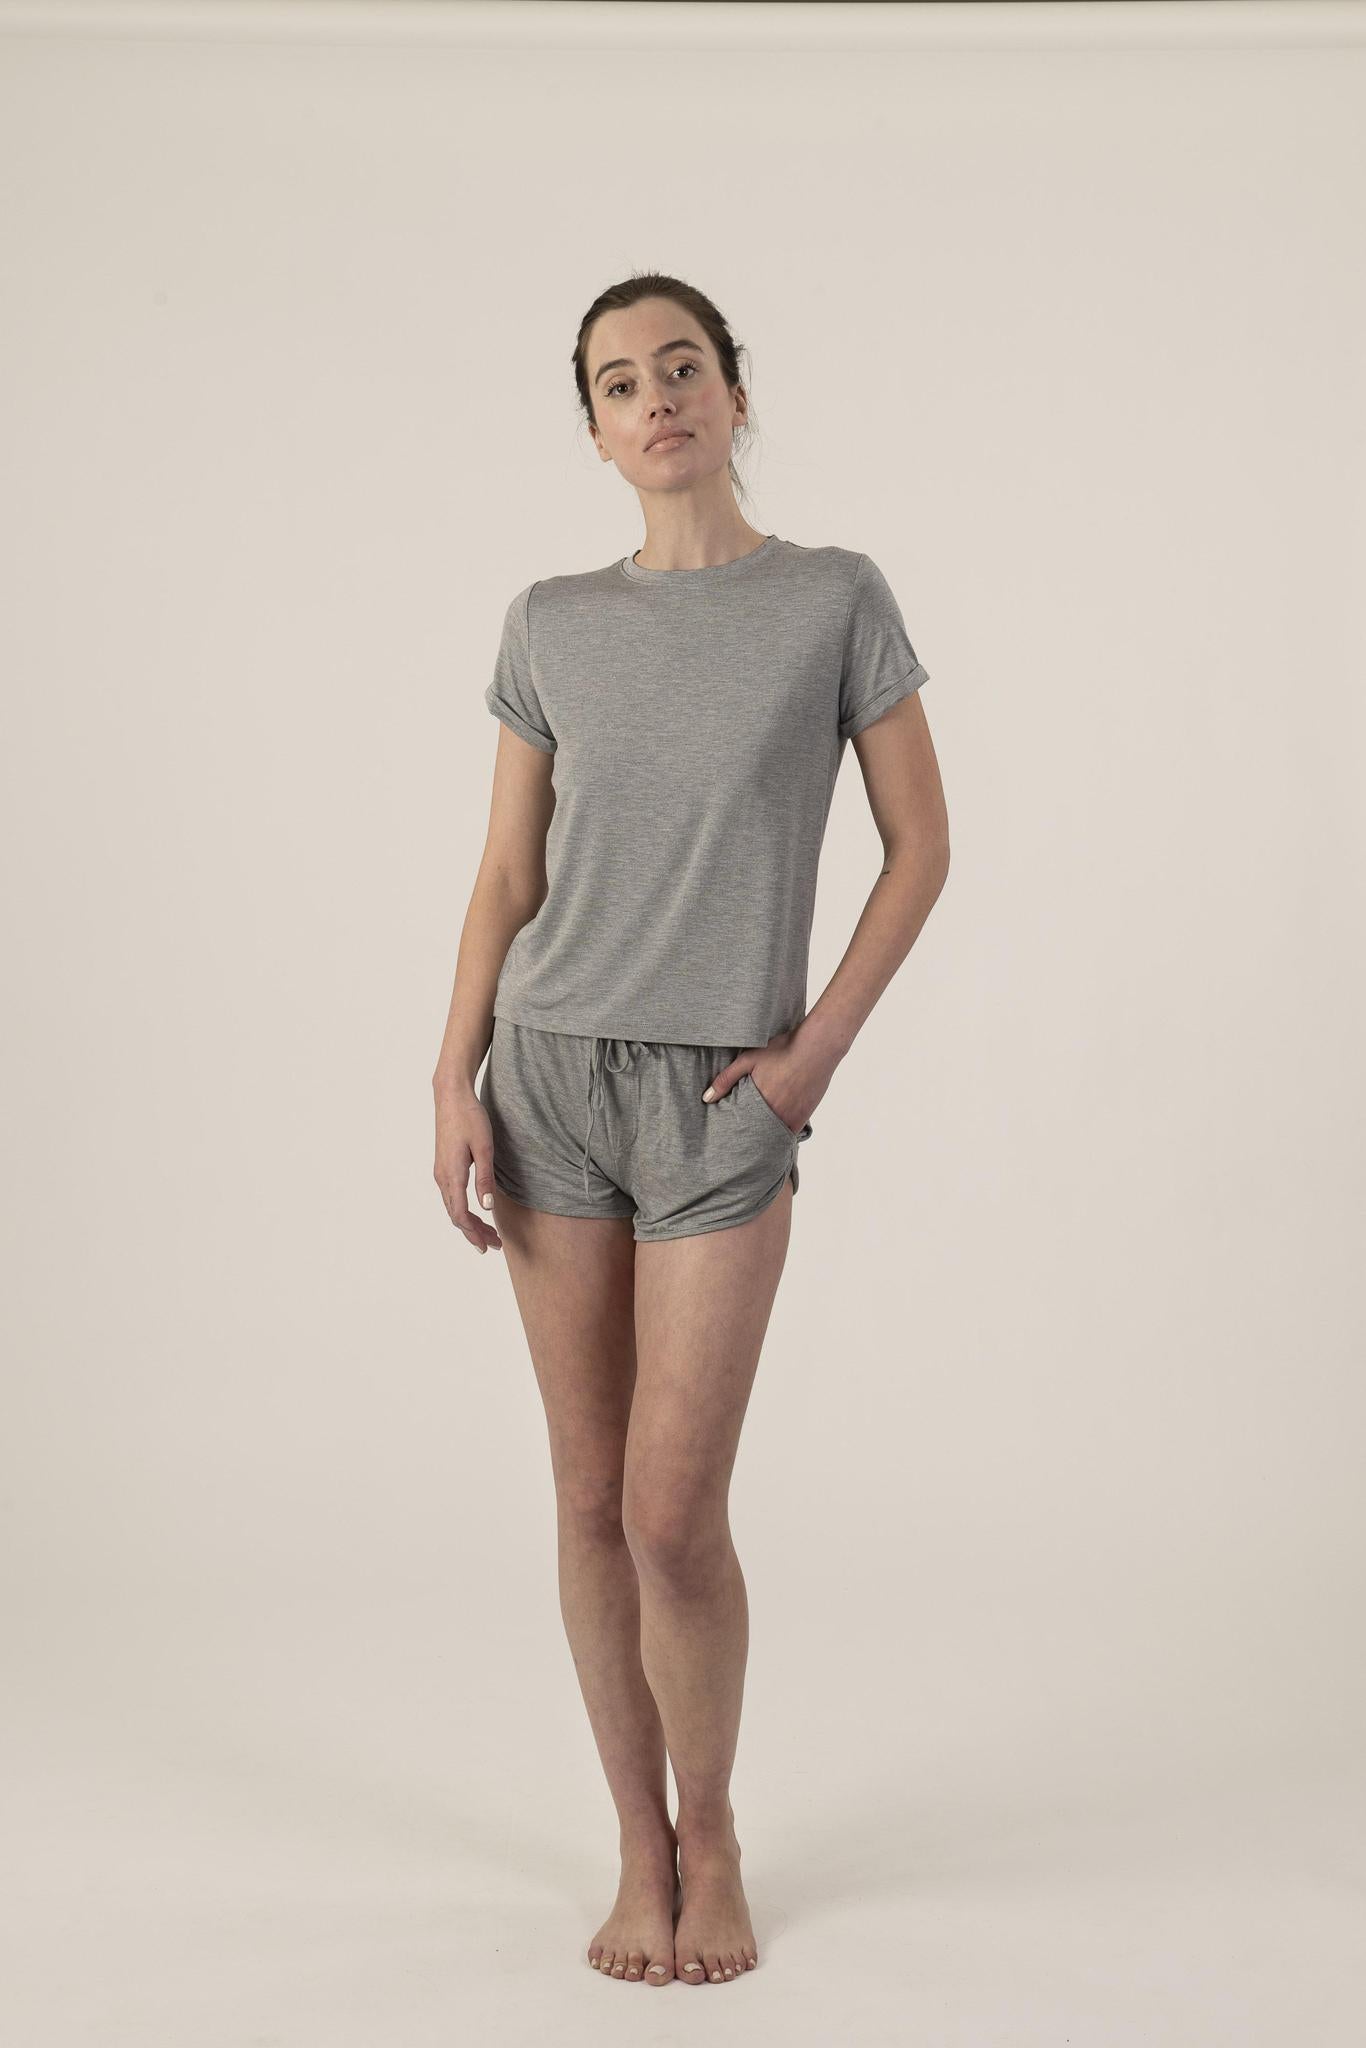 Hang out track shorts in grey